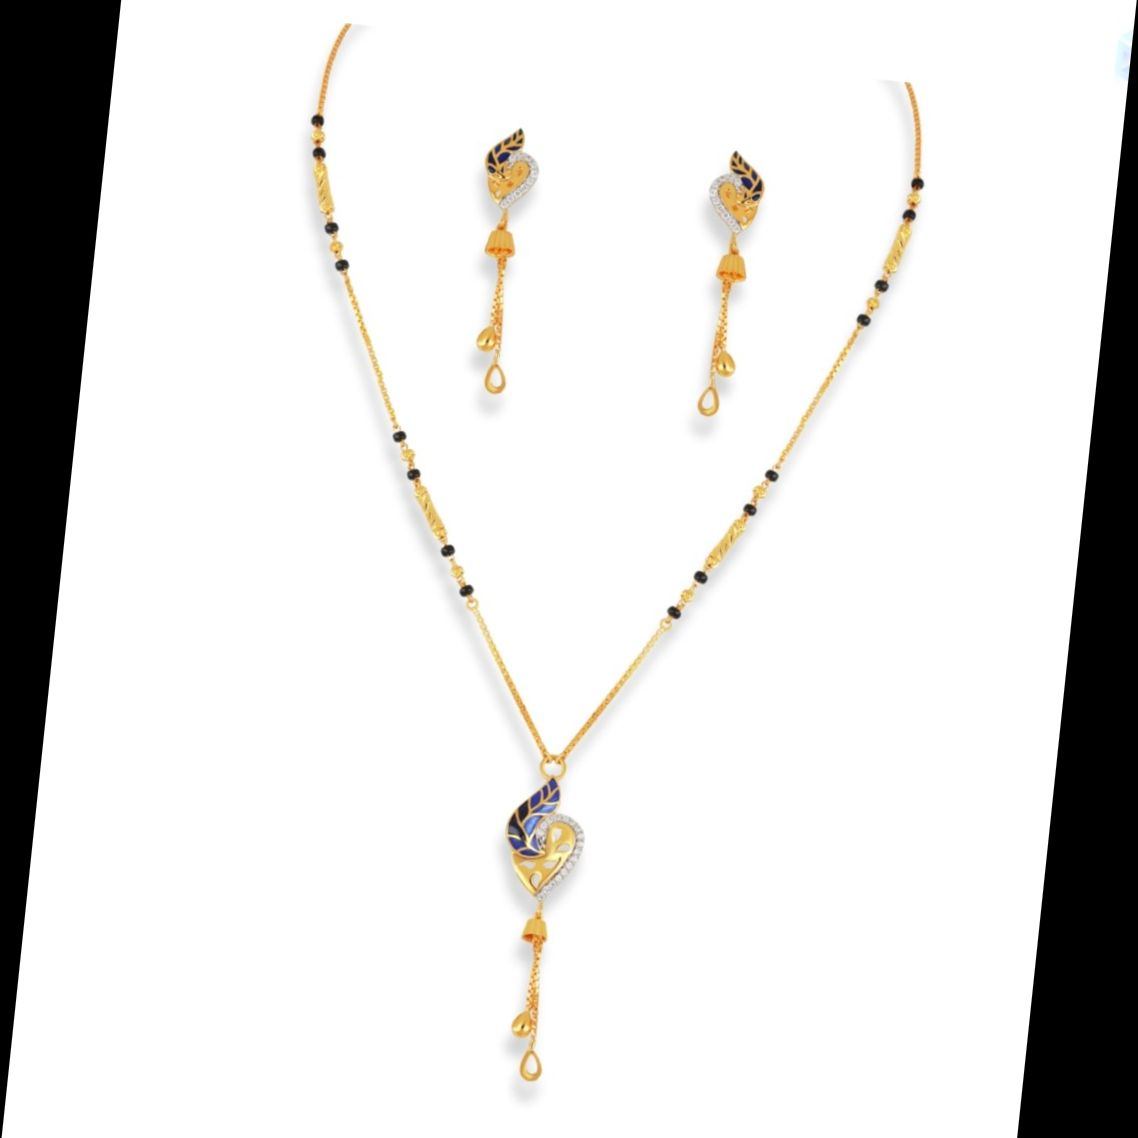 Silver American Diamond Beaded Mangalsutra With Earrings | D31-BLG-42 |  Cilory.com